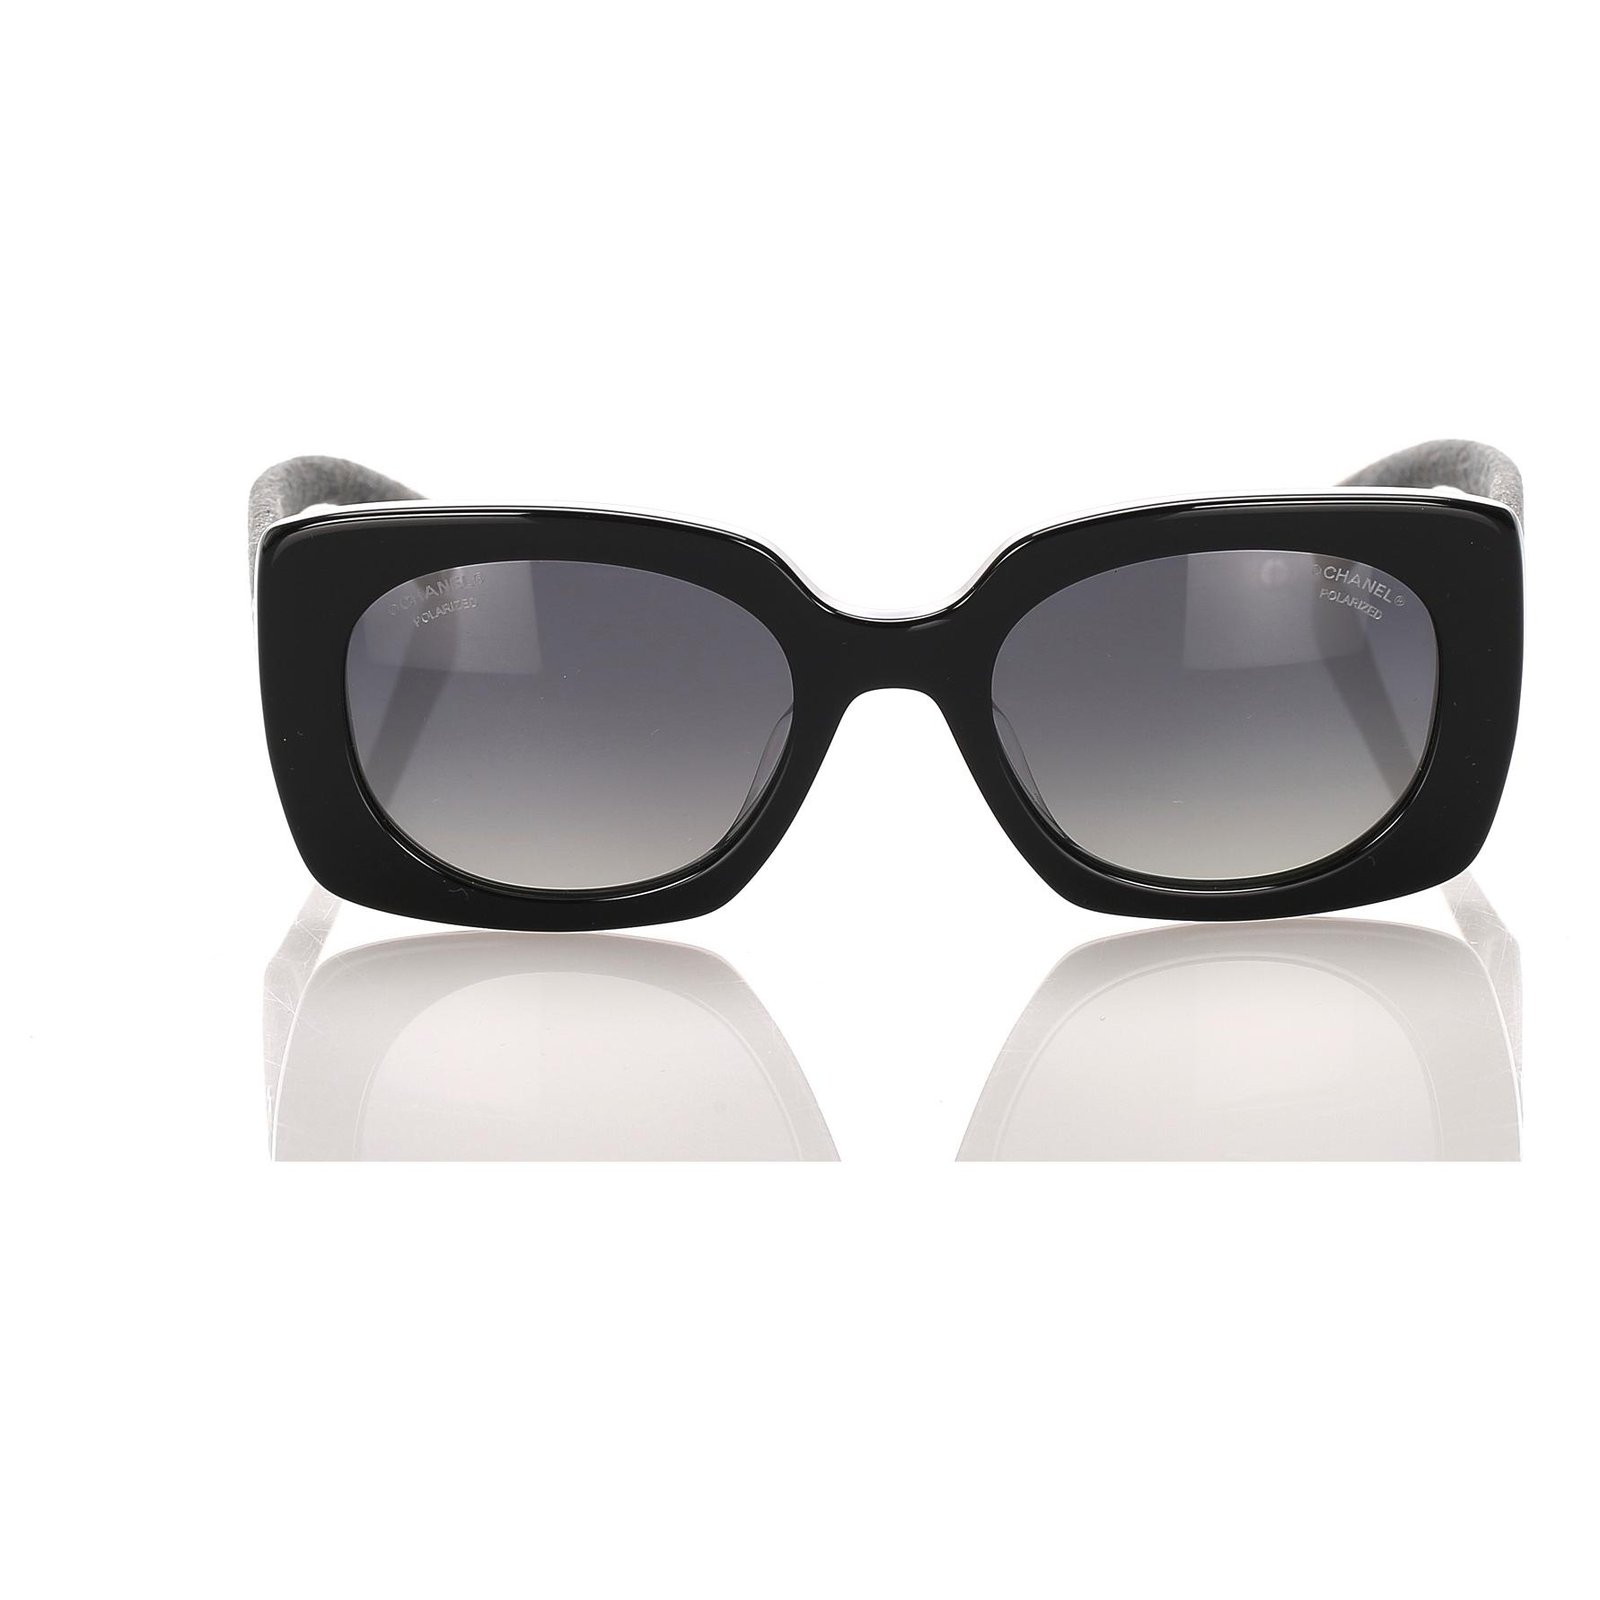 CHANEL Quilted Sunglasses 5019 Black 58546